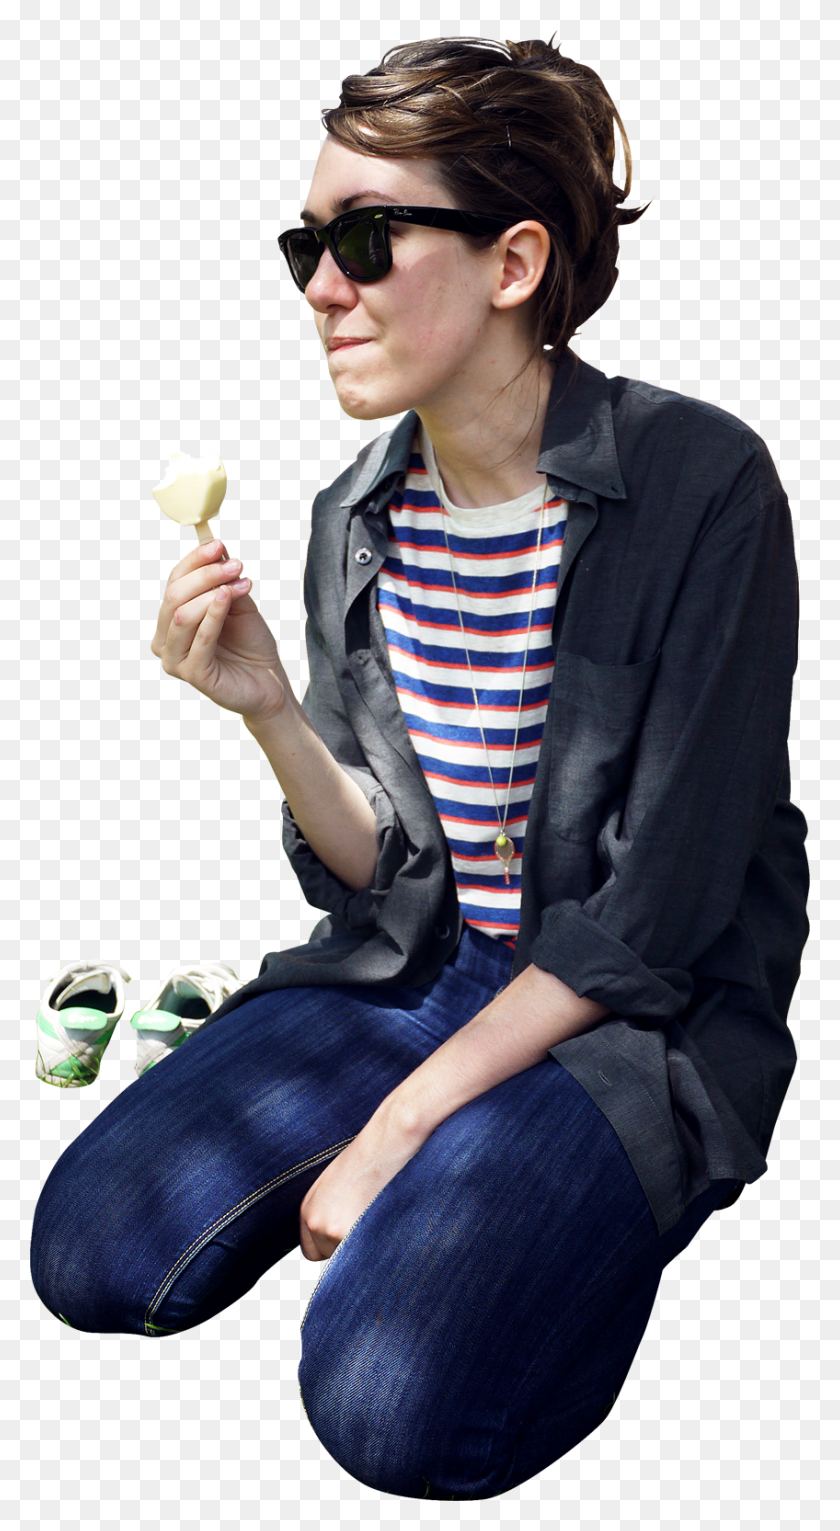 848x1600 Sitting People People Ice Cream, Sunglasses, Accessories, Accessory Descargar Hd Png